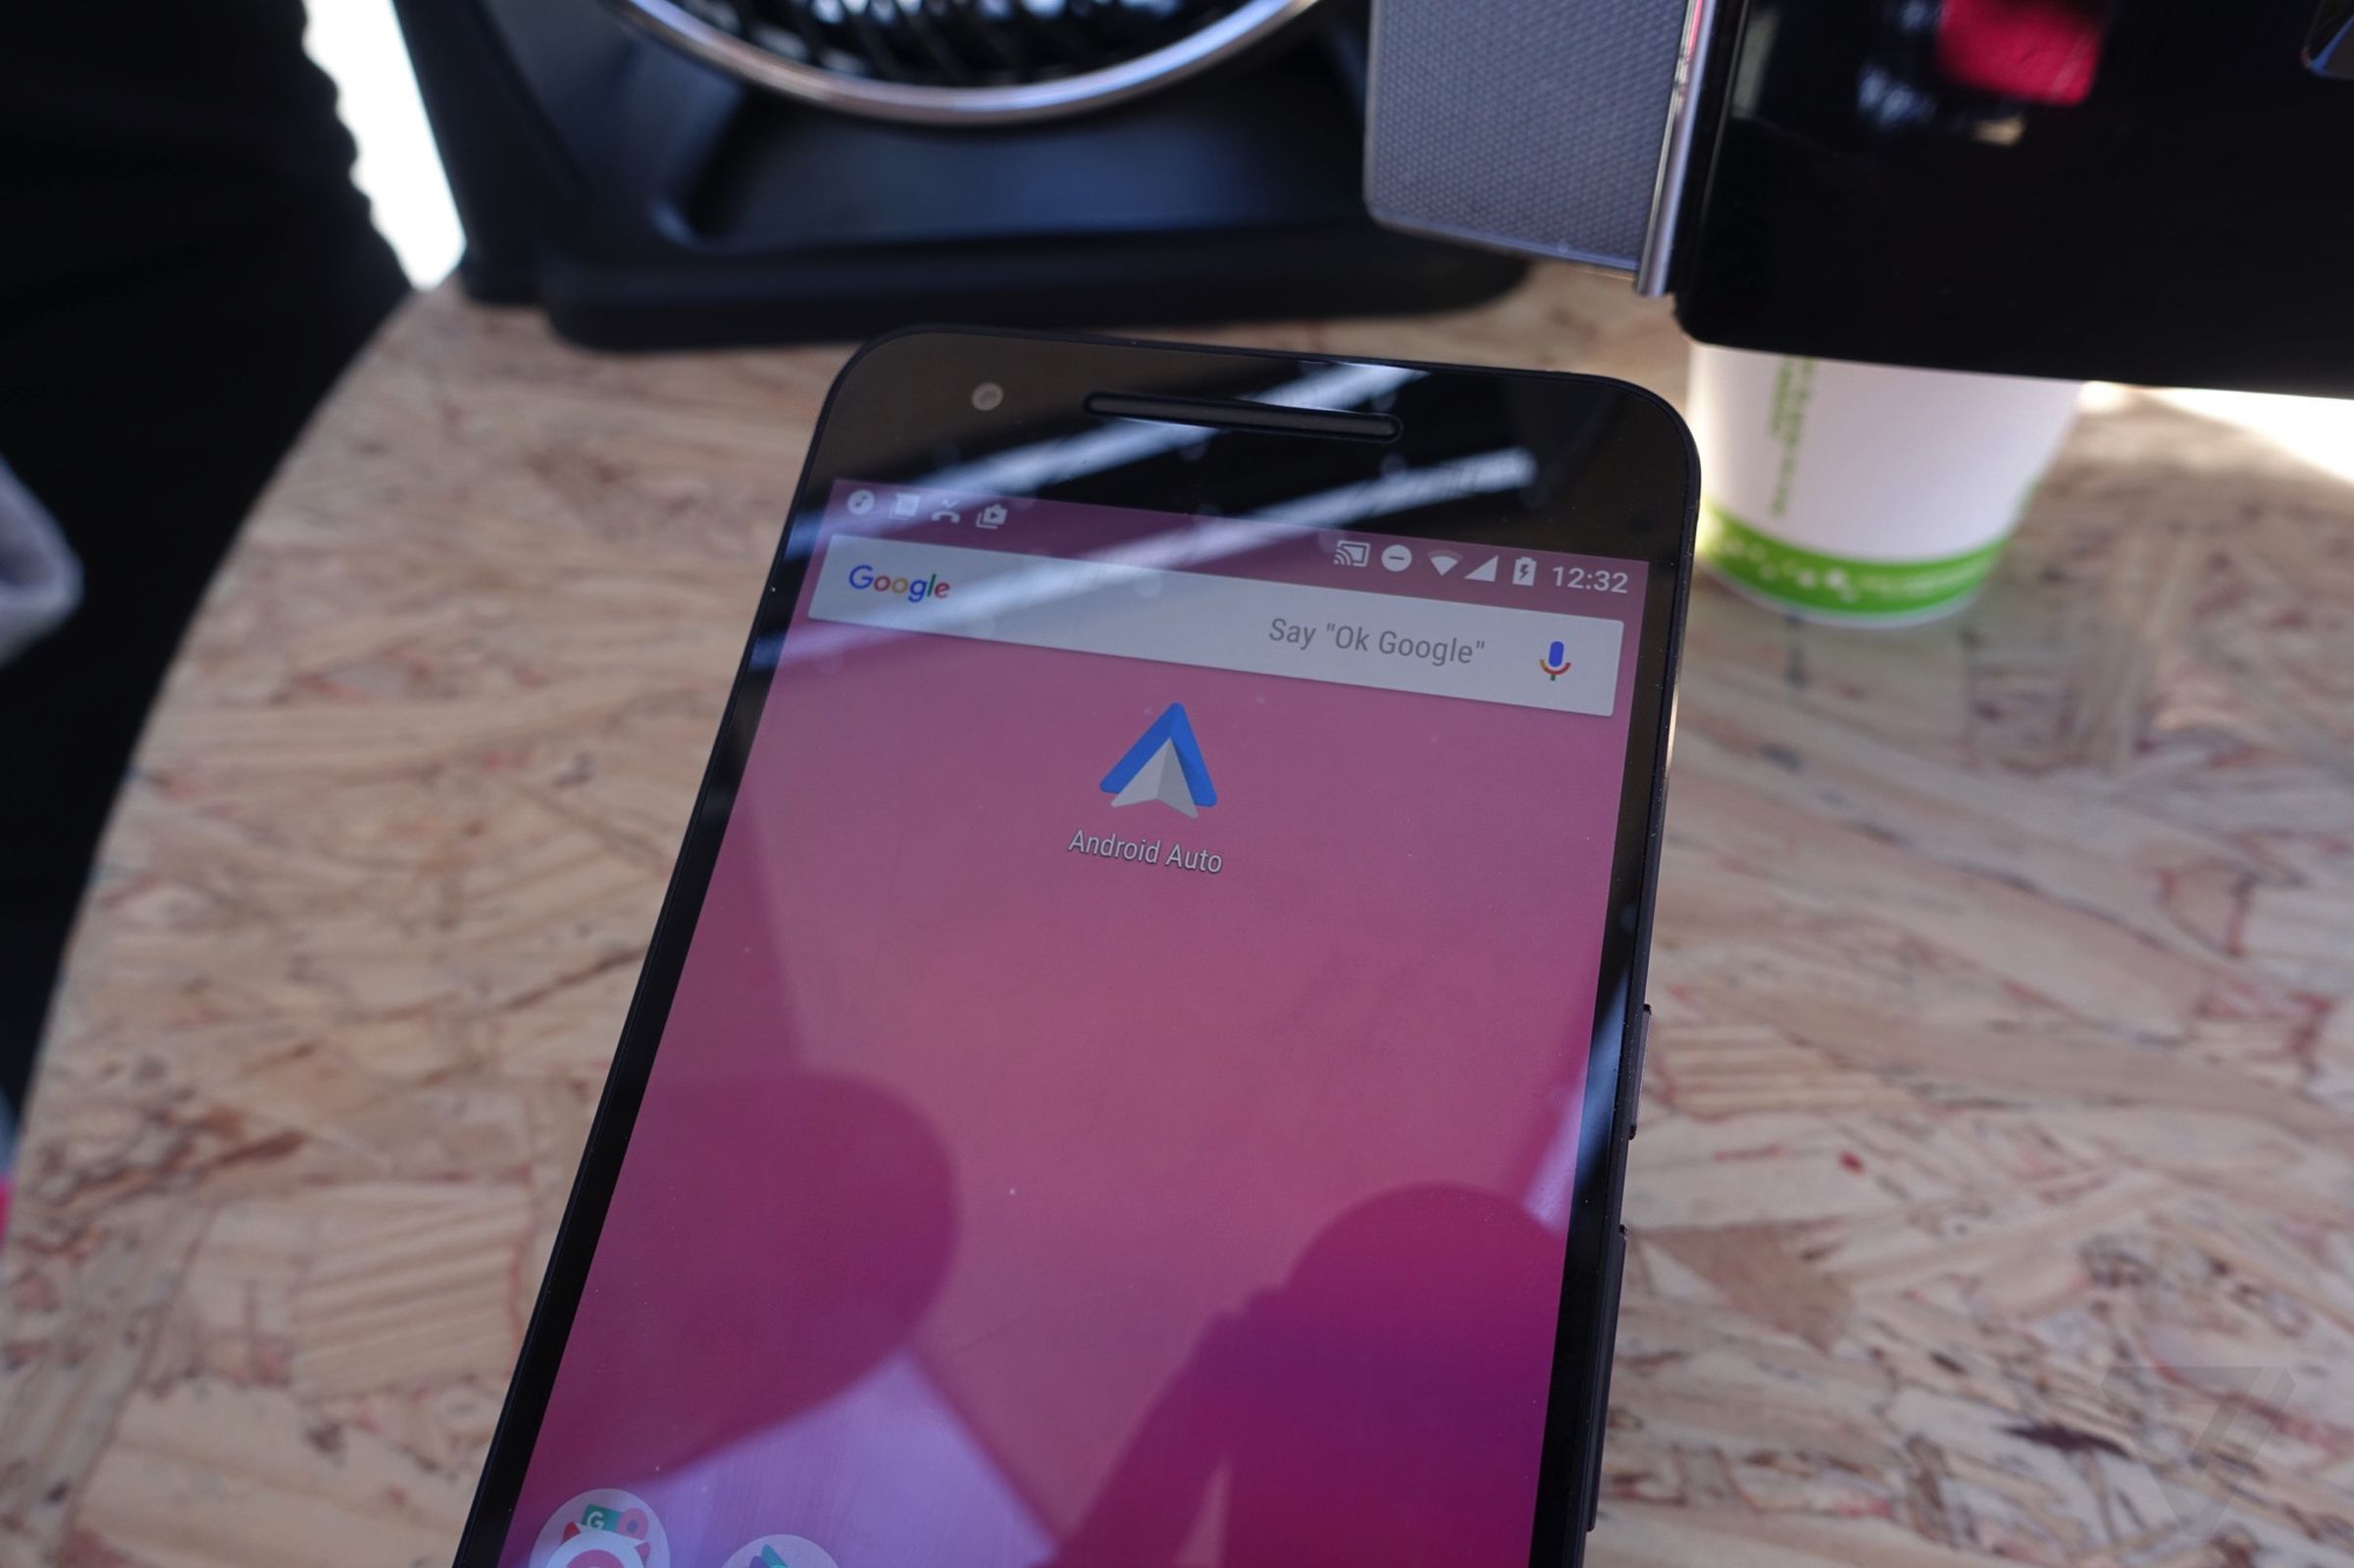 Android Auto on a phone: hands on photos